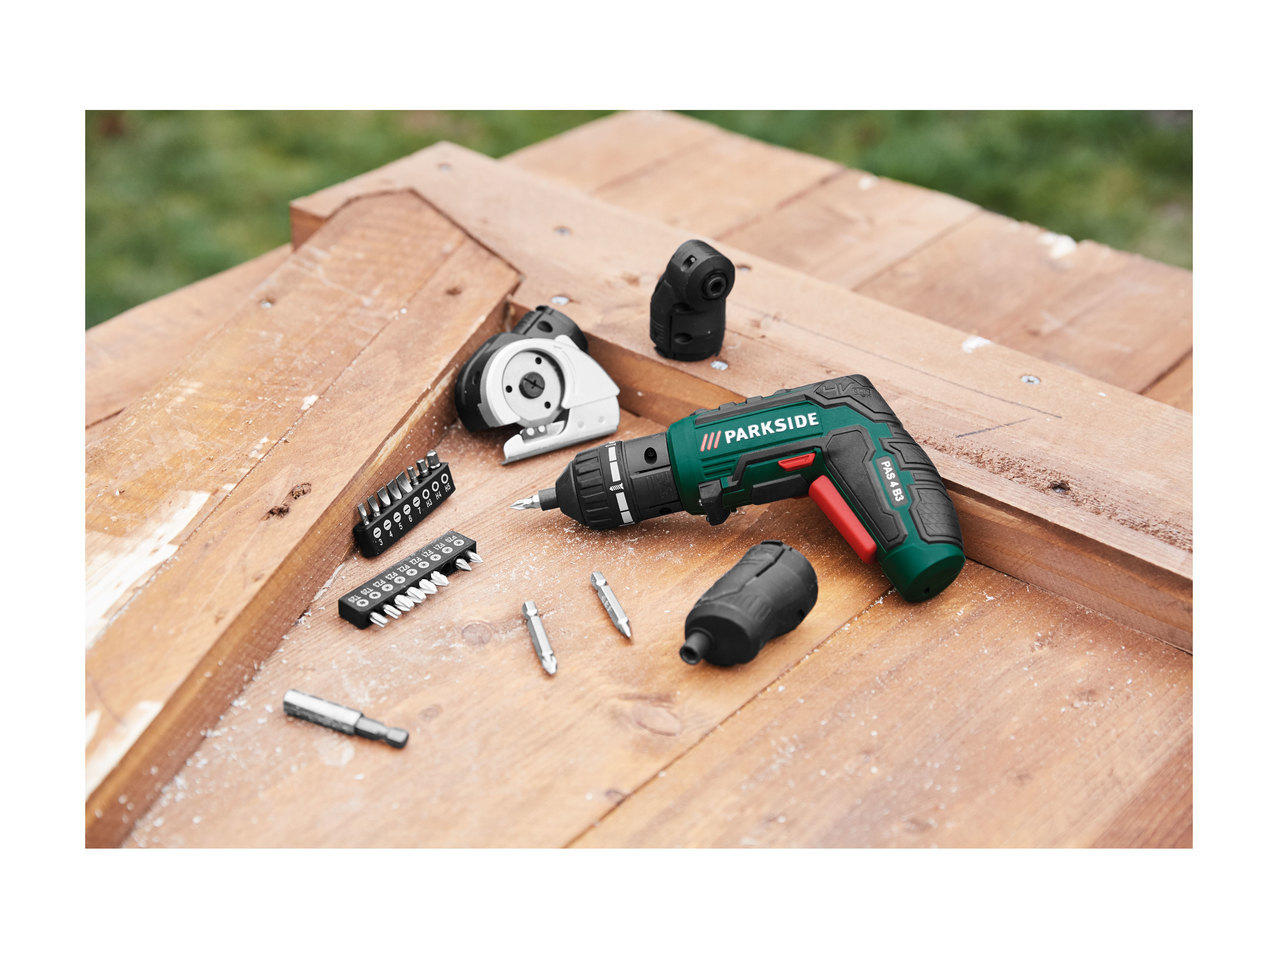 Parkside Cordless Screwdriver with Interchangeable Heads1